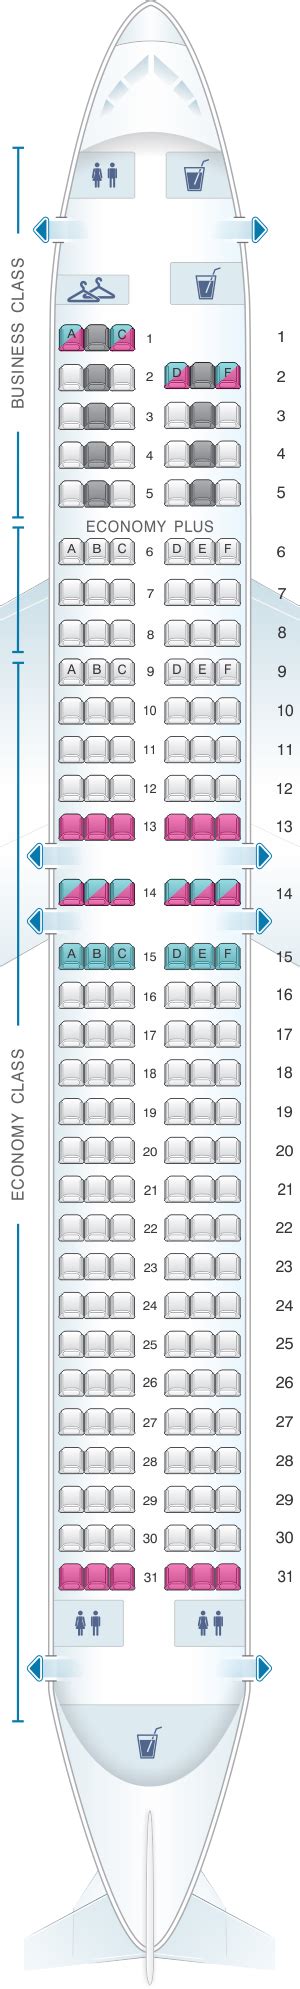 Seat Map LOT Polish Airlines Boeing B737 800 SeatMaestro